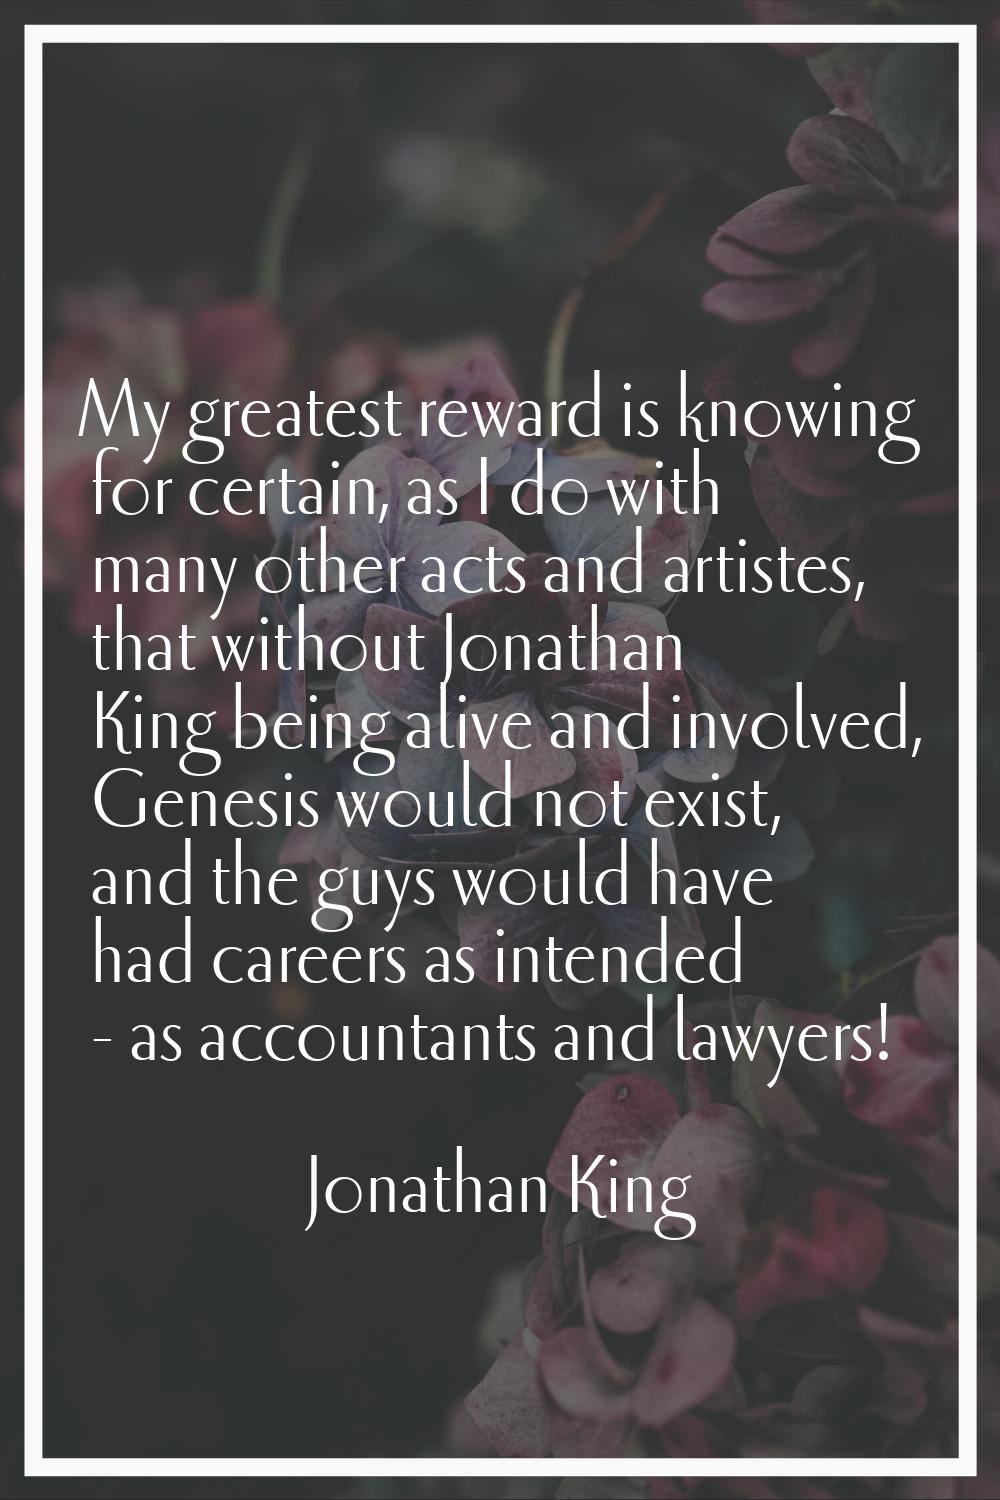 My greatest reward is knowing for certain, as I do with many other acts and artistes, that without 